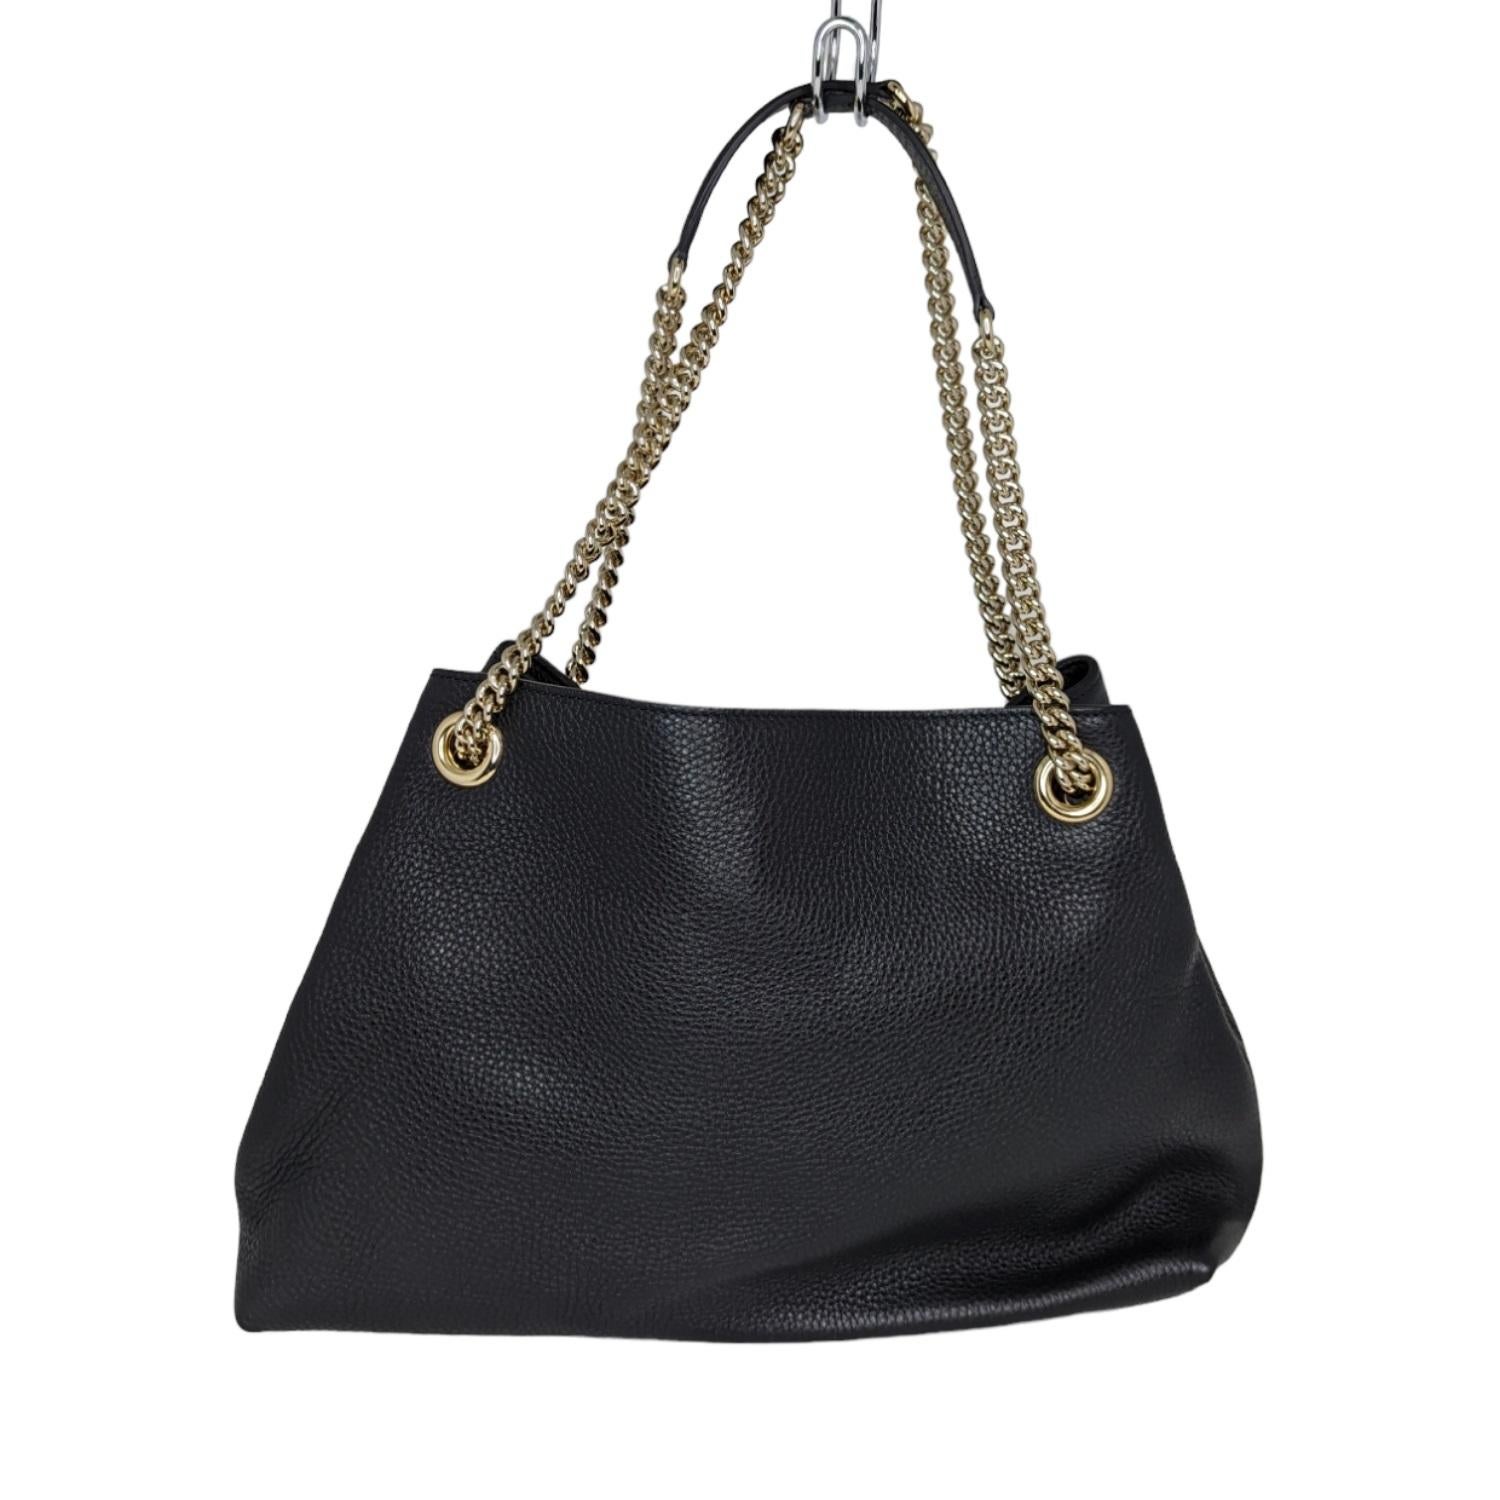 This shoulder bag is crafted of textured calfskin leather in black. The bag features a prominent front interlocking GG quilted logo, polished light gold chain link shoulder straps with shoulder pads, and a decorative light gold knobbed tassel. The